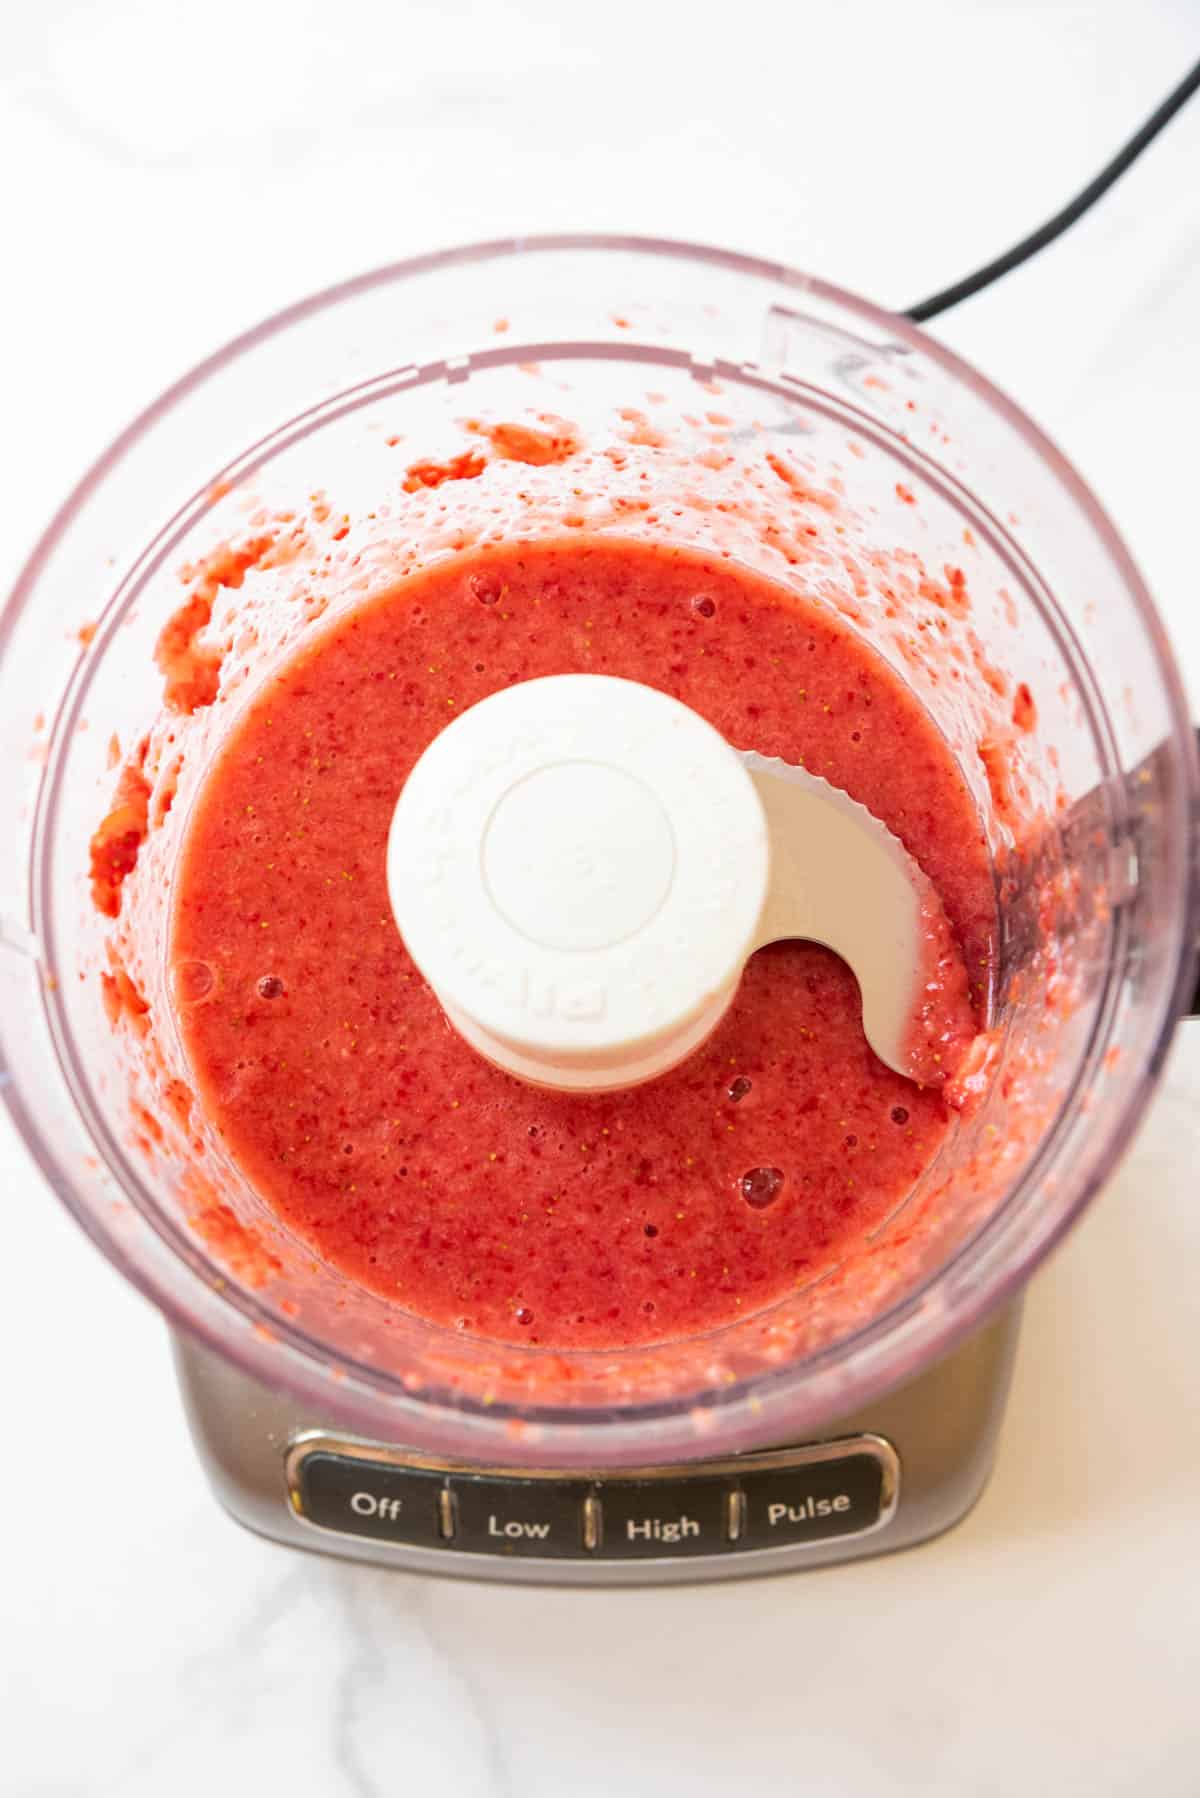 Pureeing strawberries in a food processor.